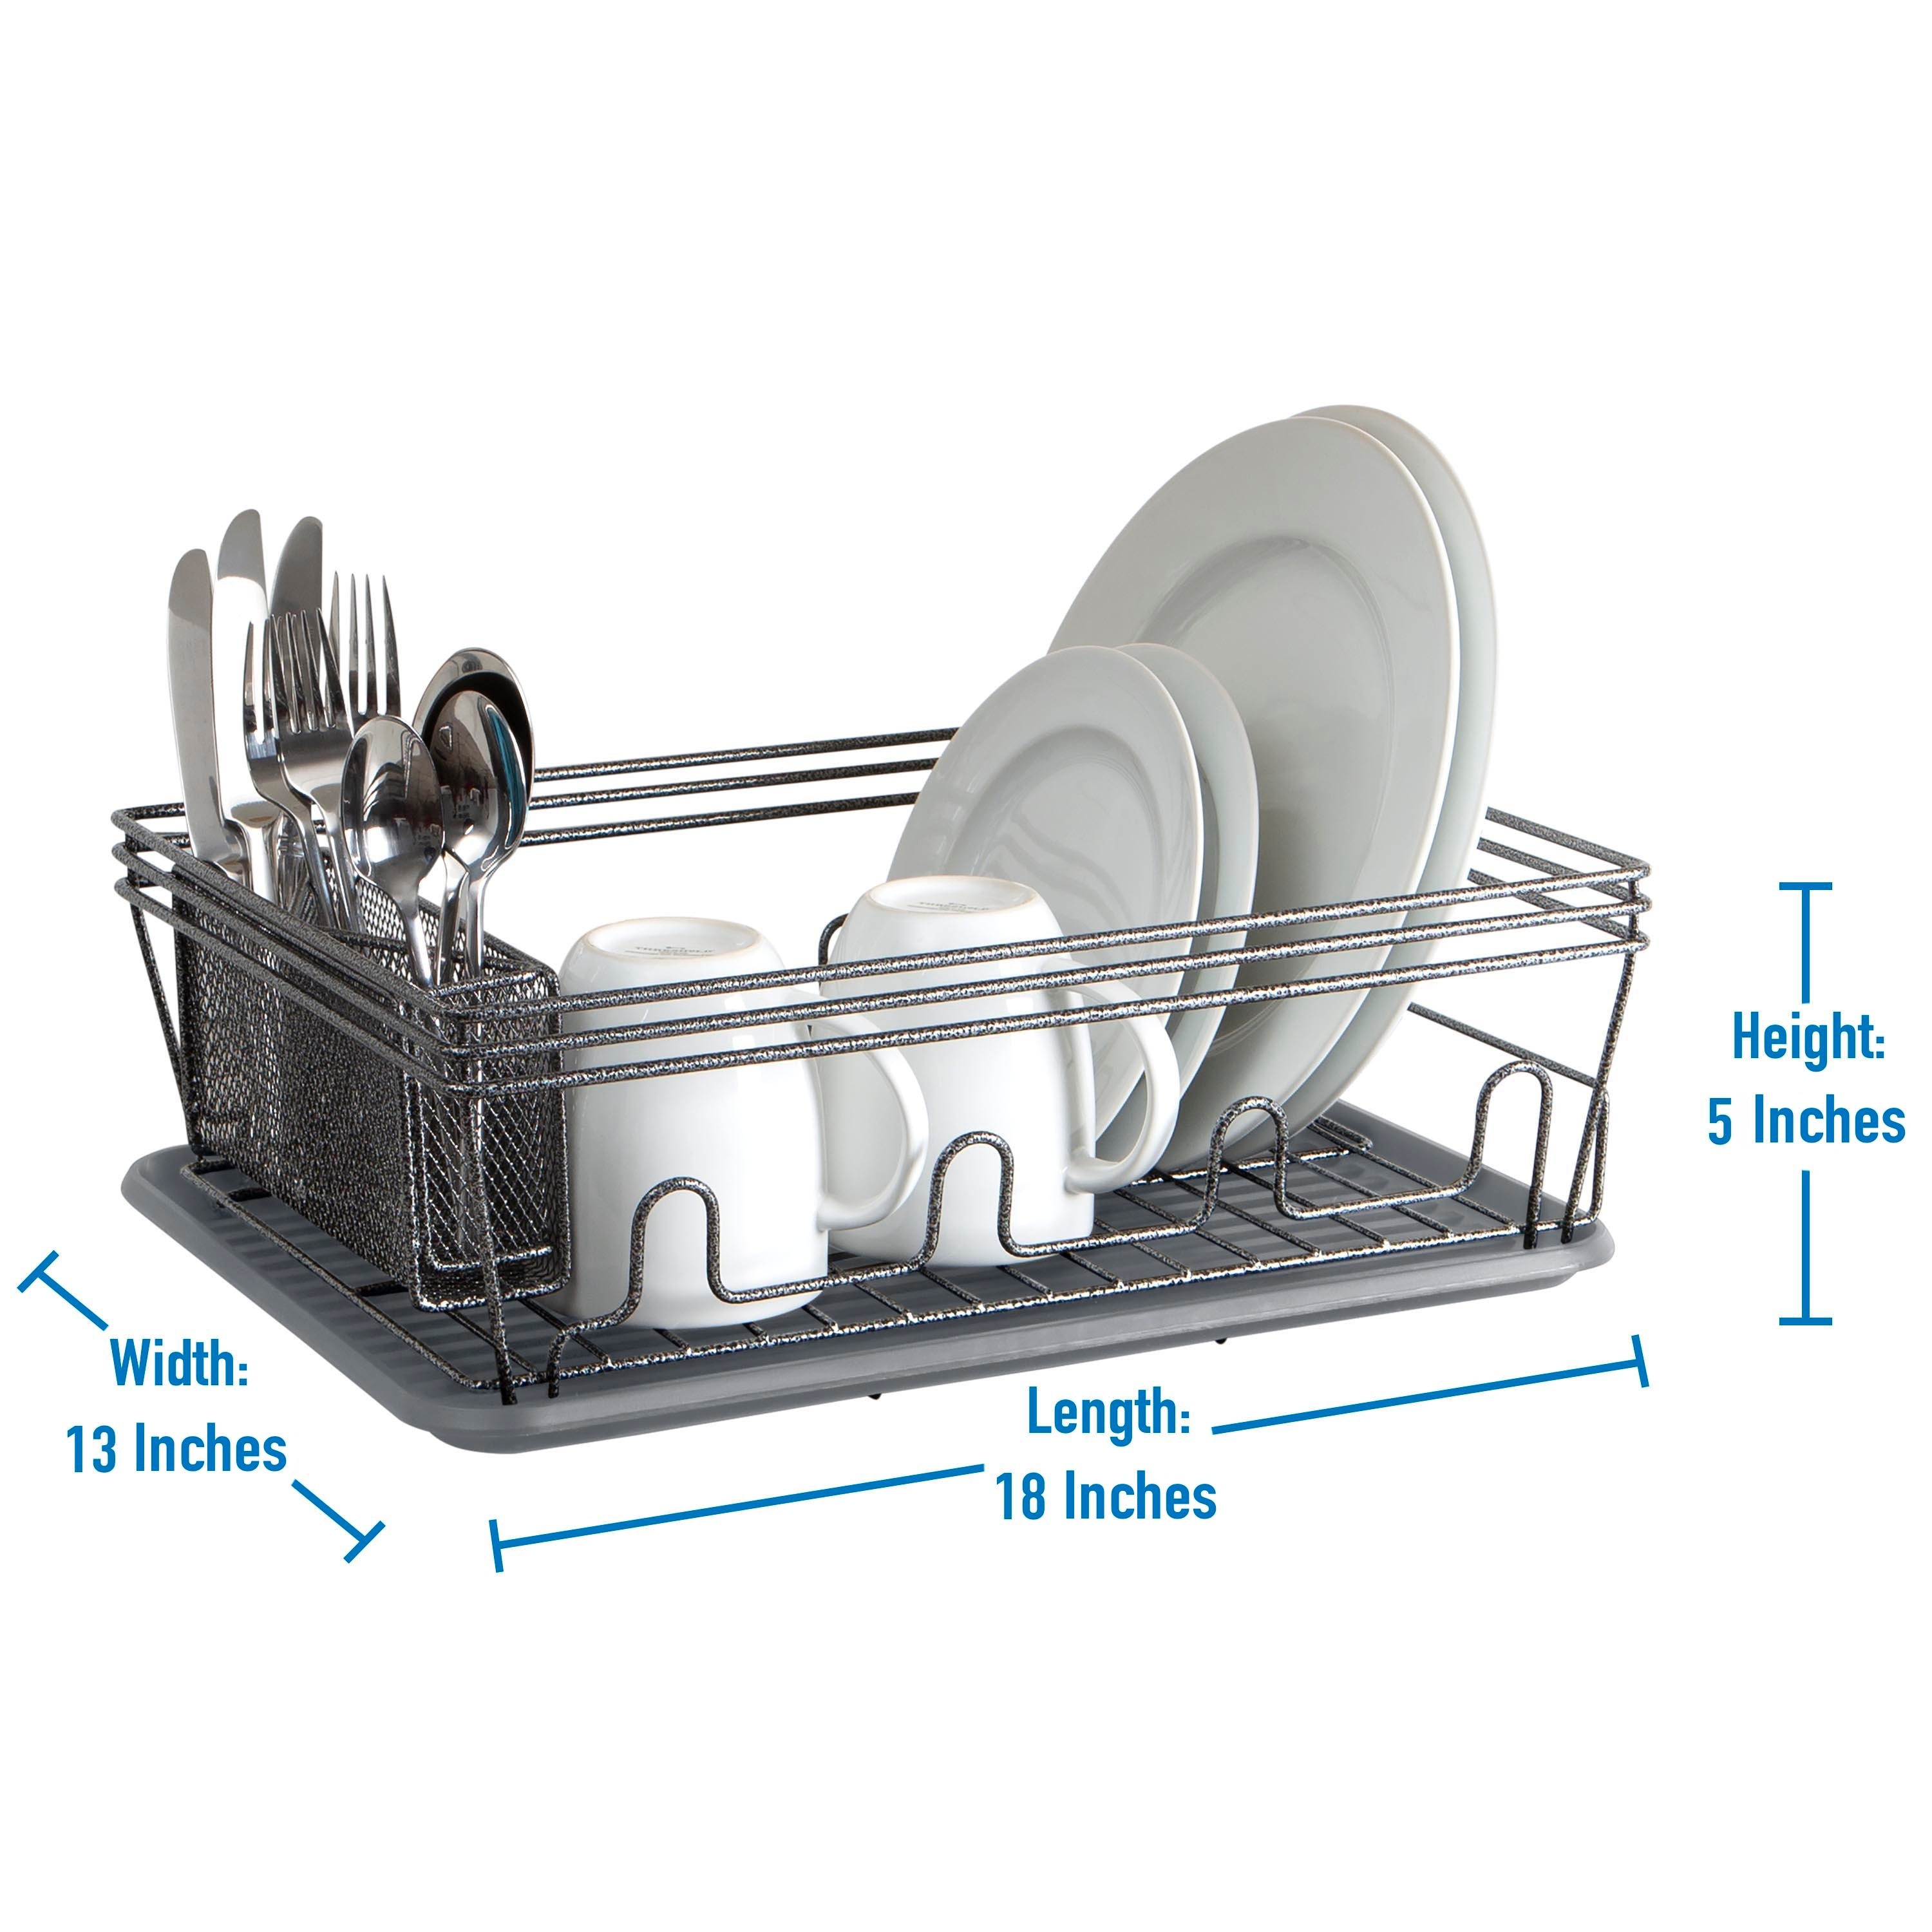 https://ak1.ostkcdn.com/images/products/is/images/direct/177946f05ec4cc6d23a85e6364093981516fb47c/Laura-Ashley-Speckled-Dish-Rack-Set-in-Grey.jpg